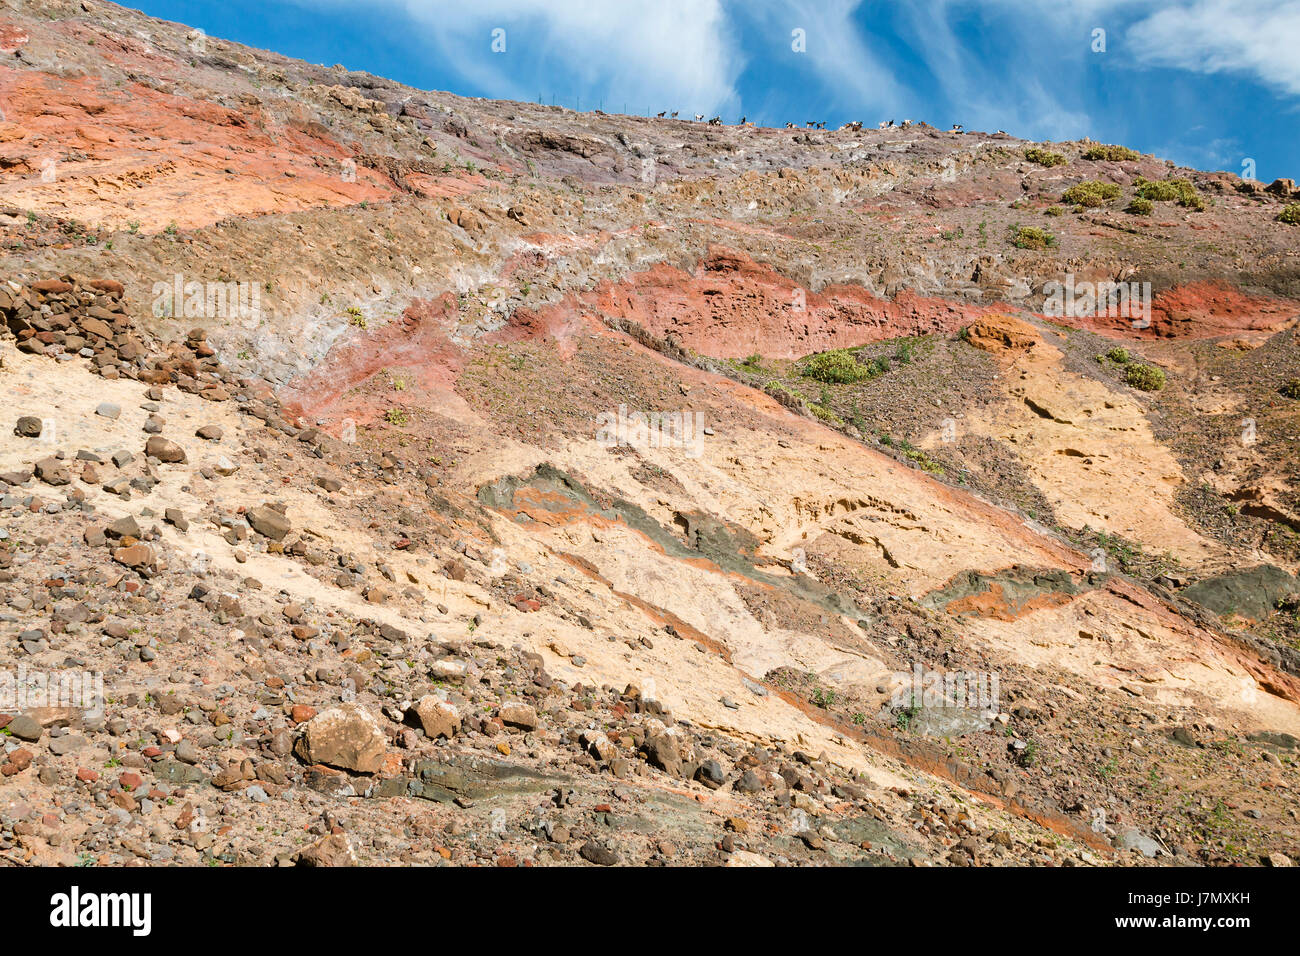 View of colorful volcanic soil layers in Lanzarote, Spain near the village of Femes. Stock Photo